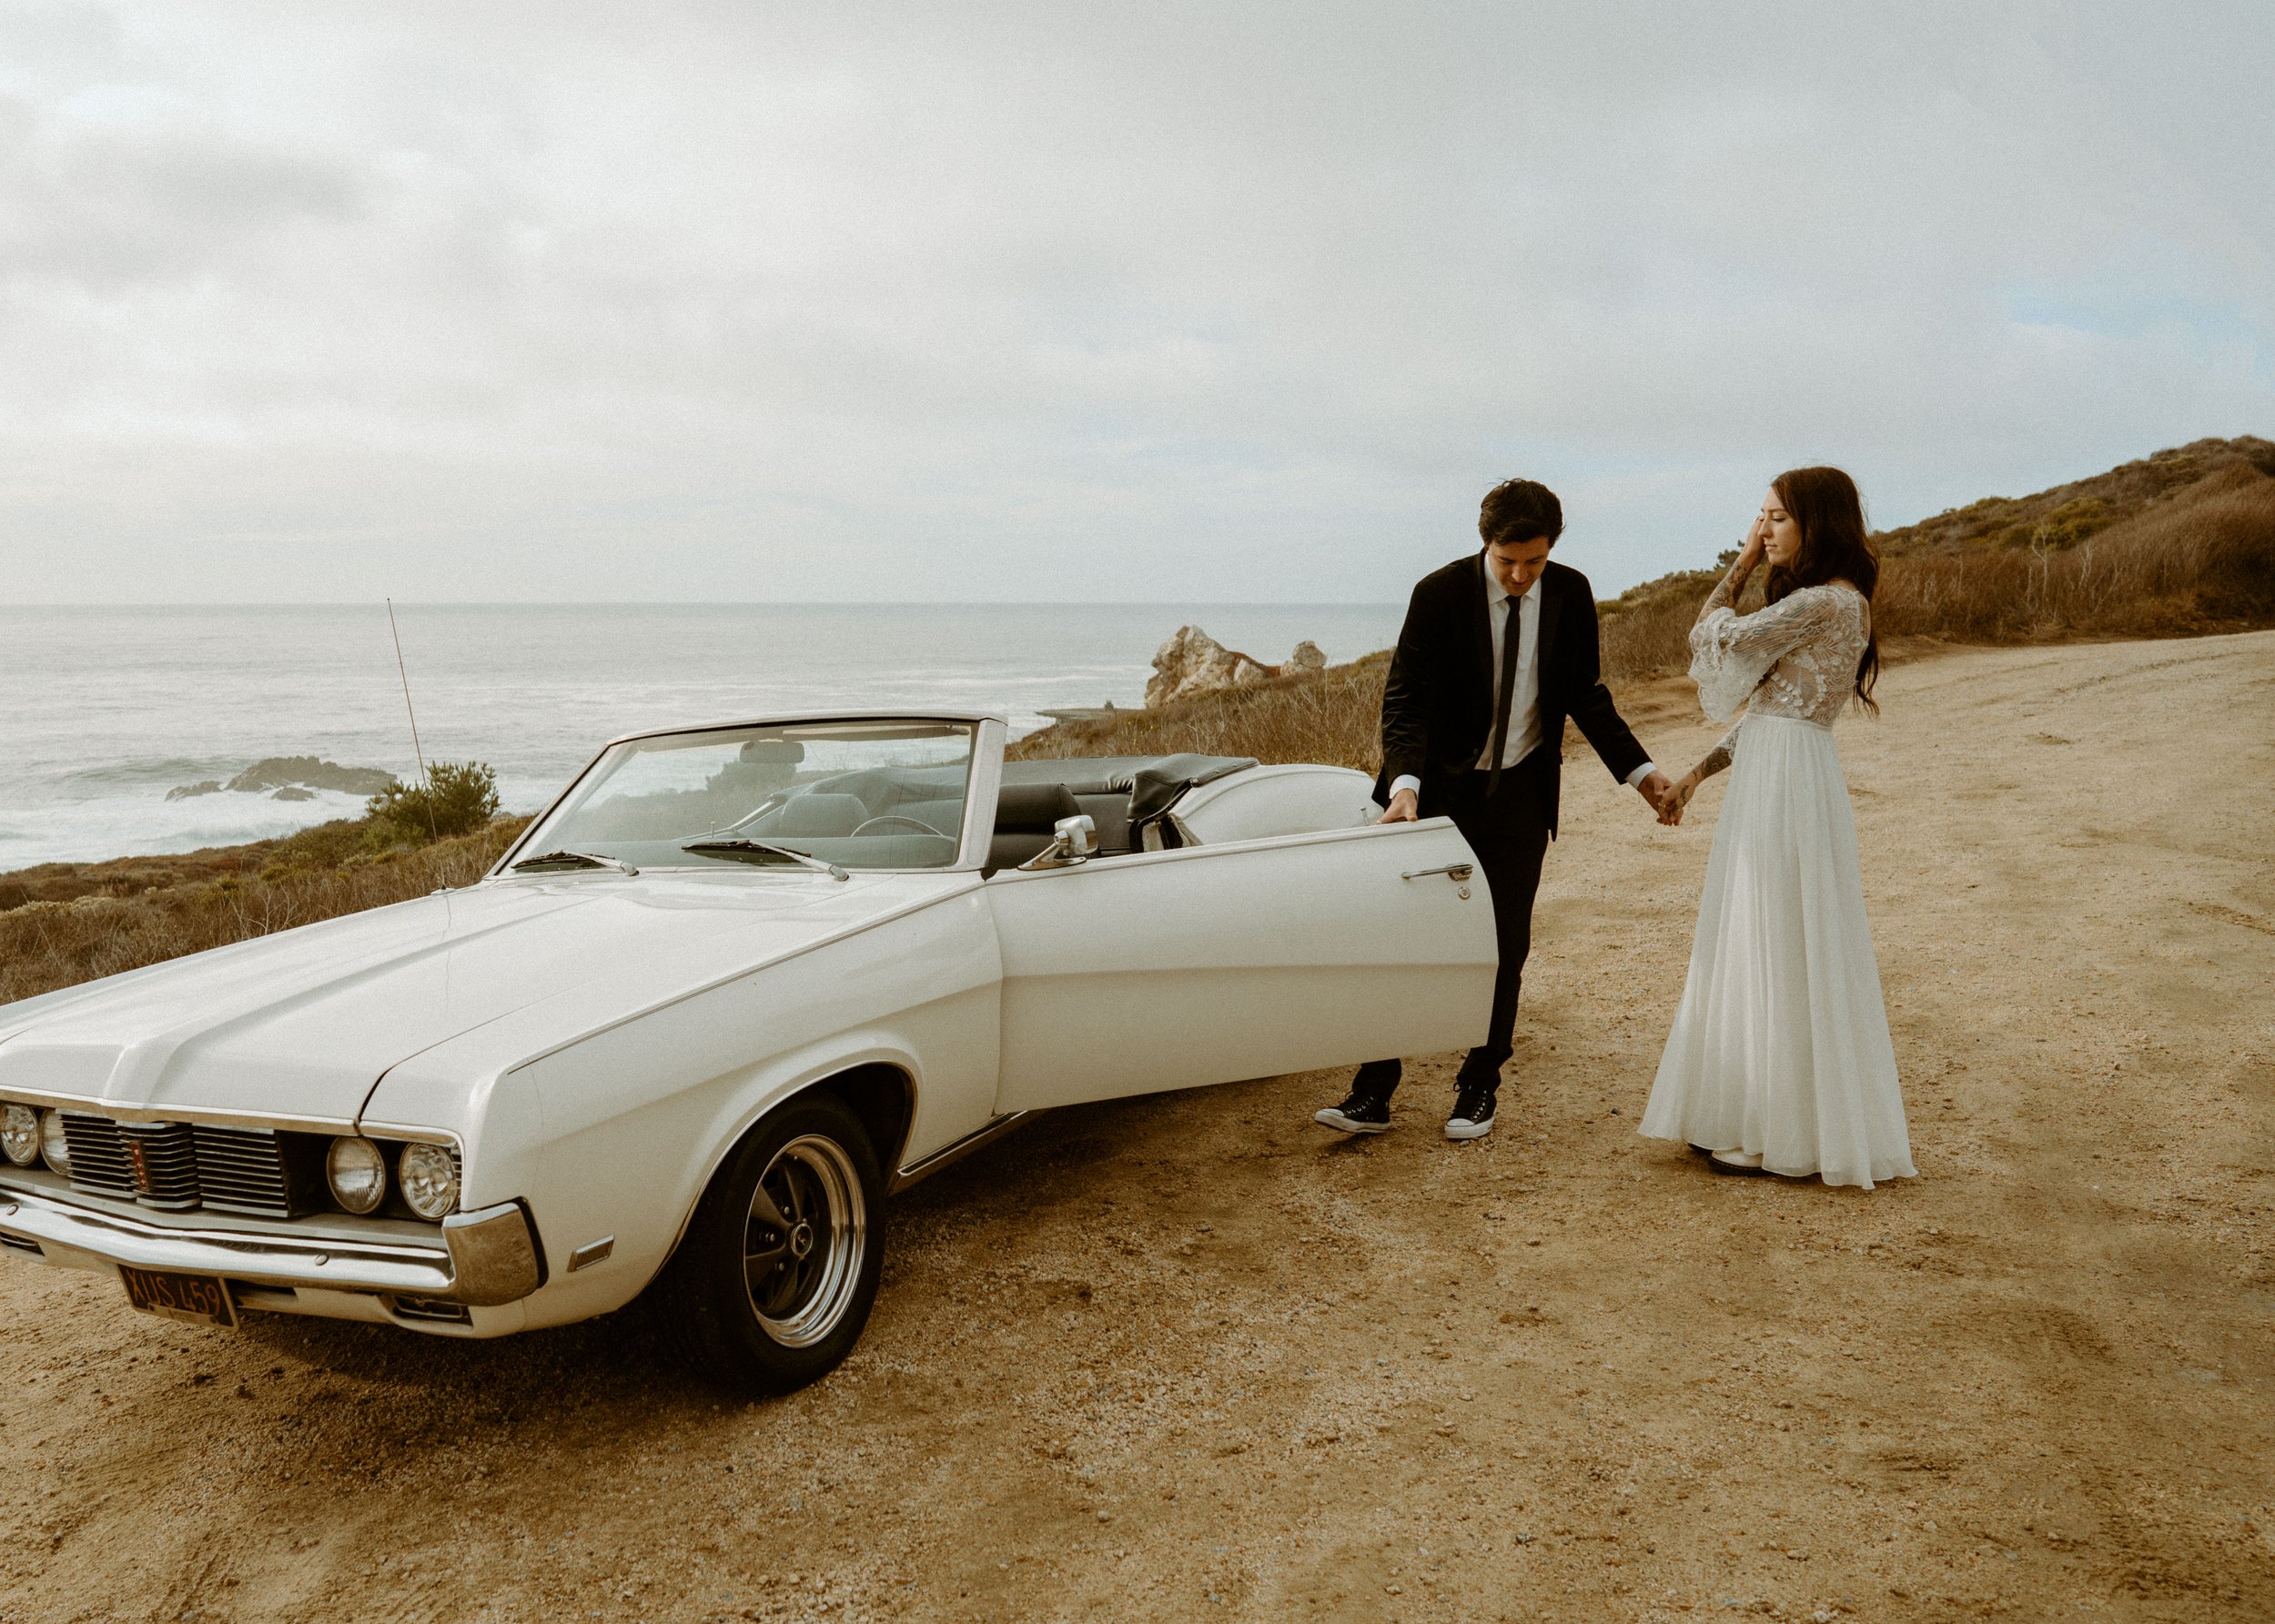 Vintage car elopement photos in Big Sur California | Nontraditional wedding photos | Big Sur elopement photographer | Bride and Groom with Tattoos